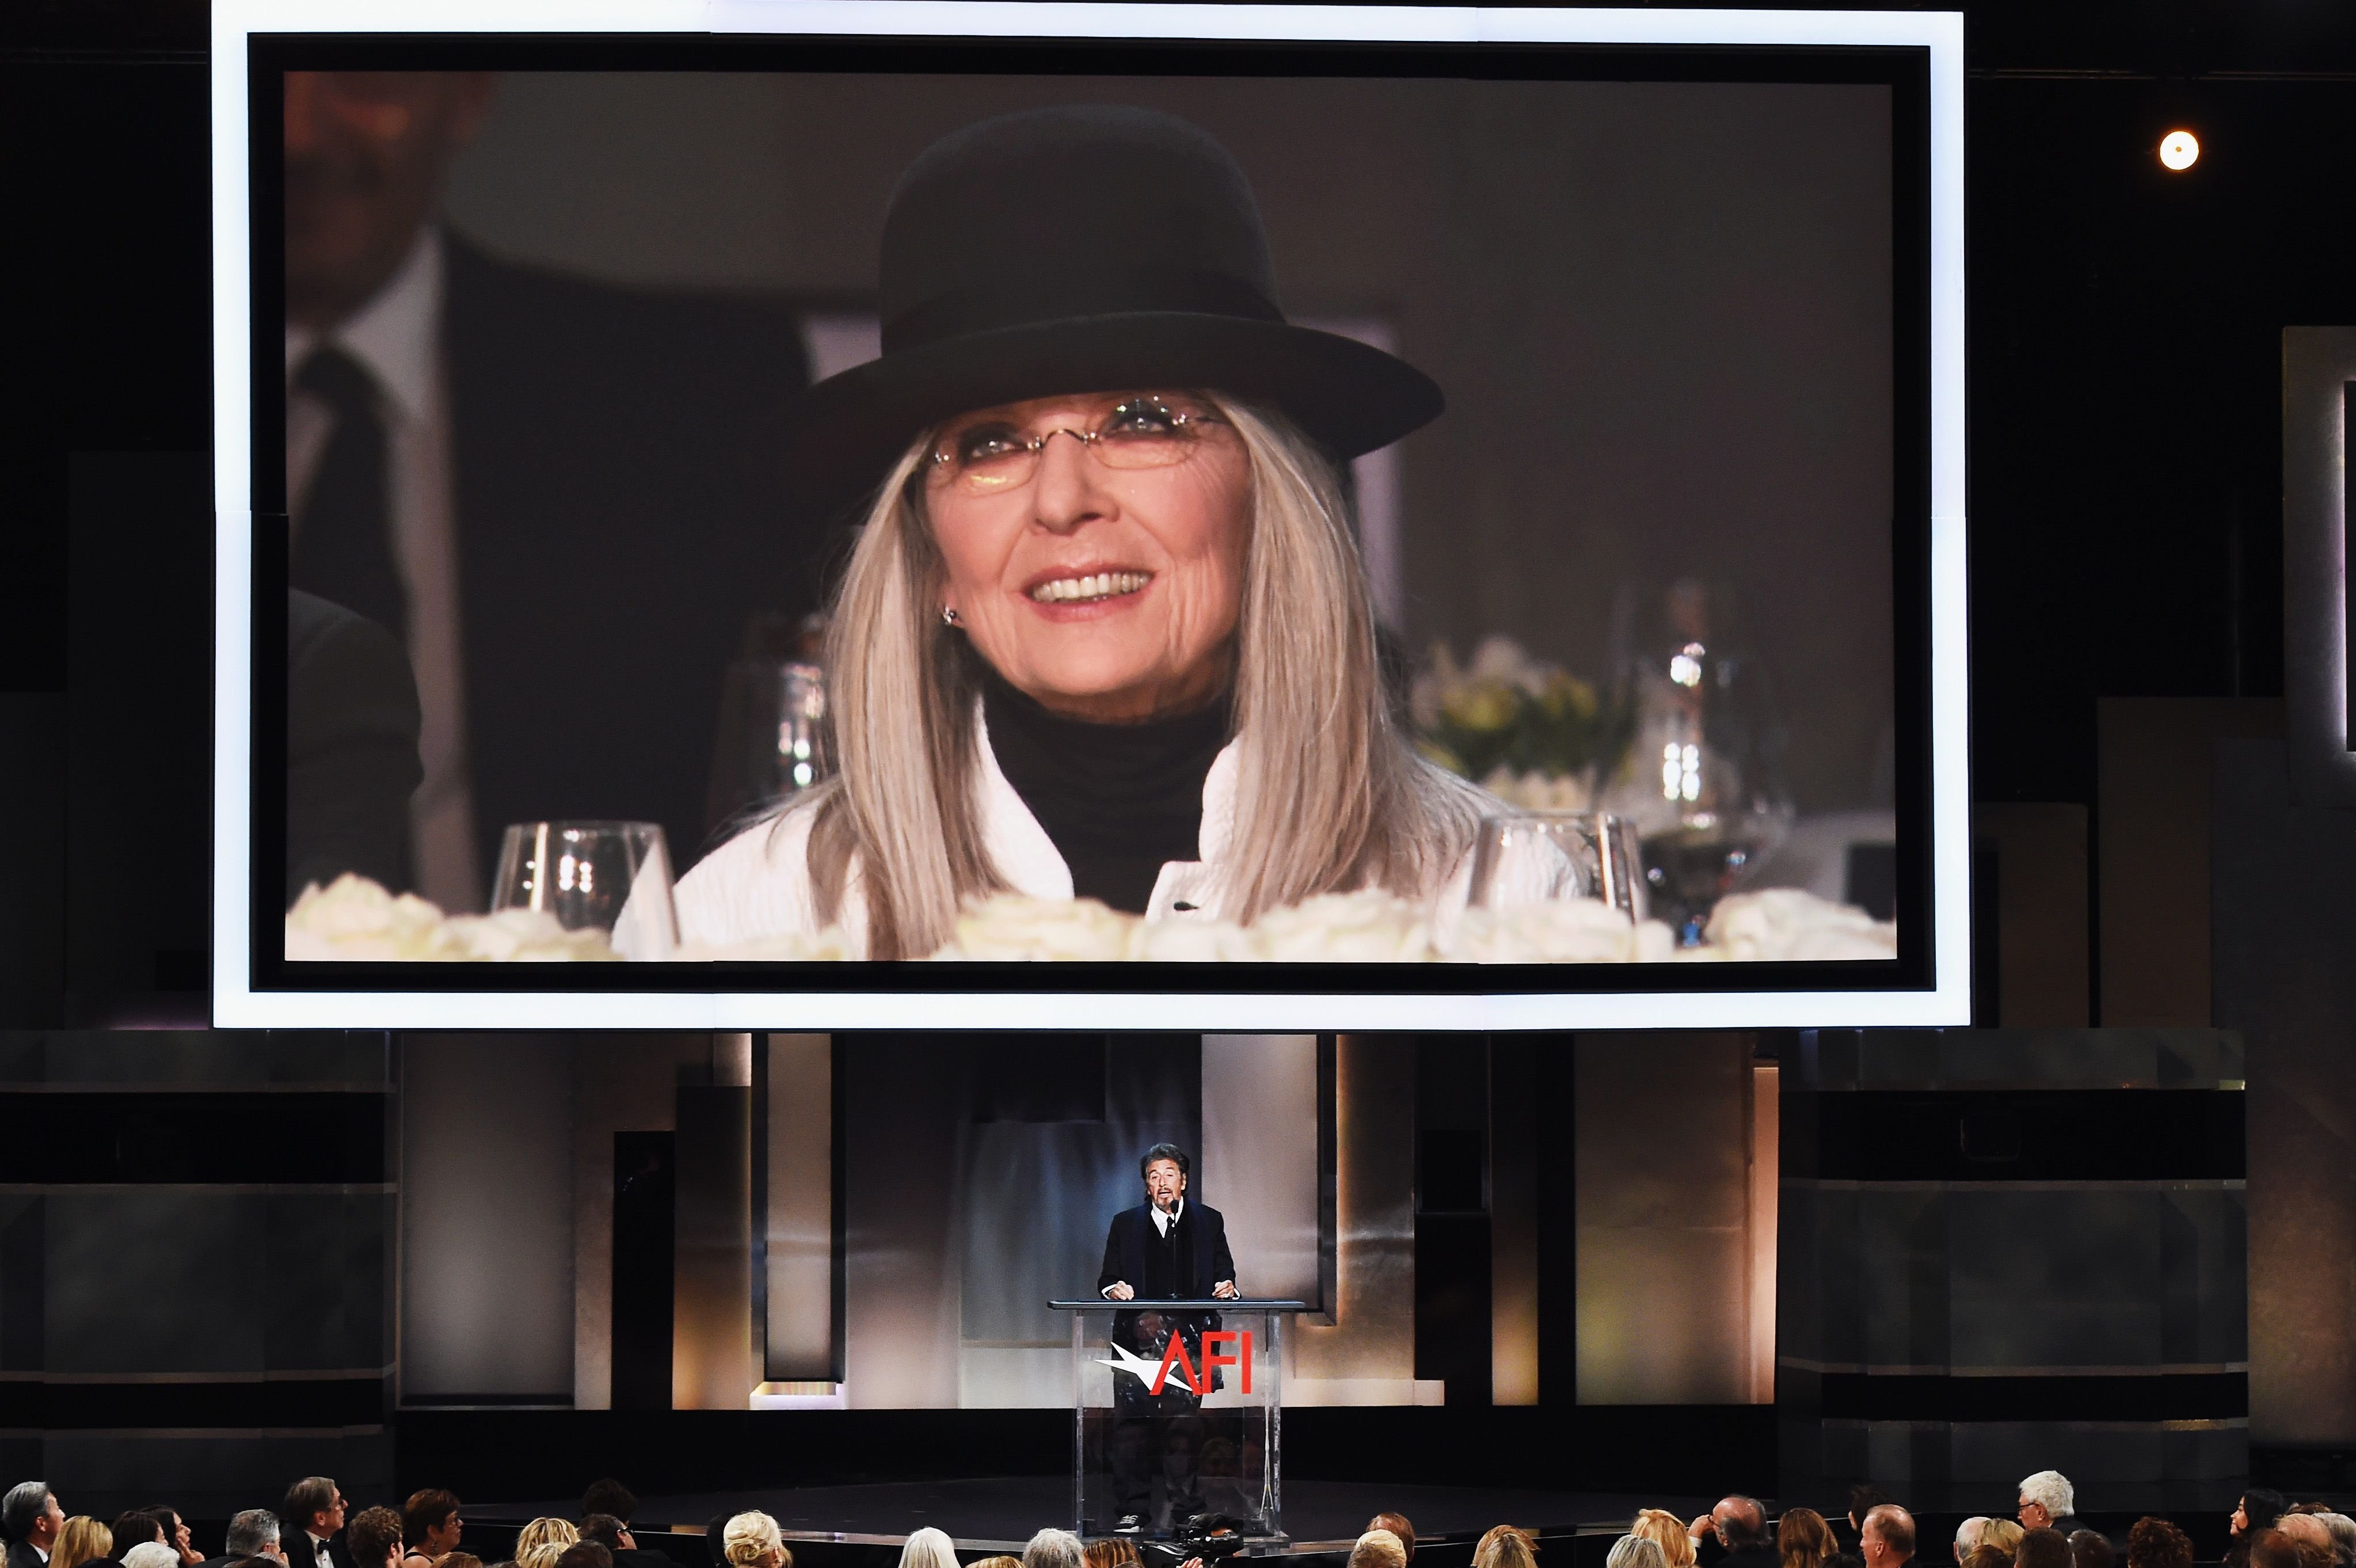 Diane Keaton projected on a video screen while Al Pacino speaks onstage during the American Film Institute's 45th Life Achievement Award Gala on June 8, 2017, in Hollywood, California. | Source: Getty Images